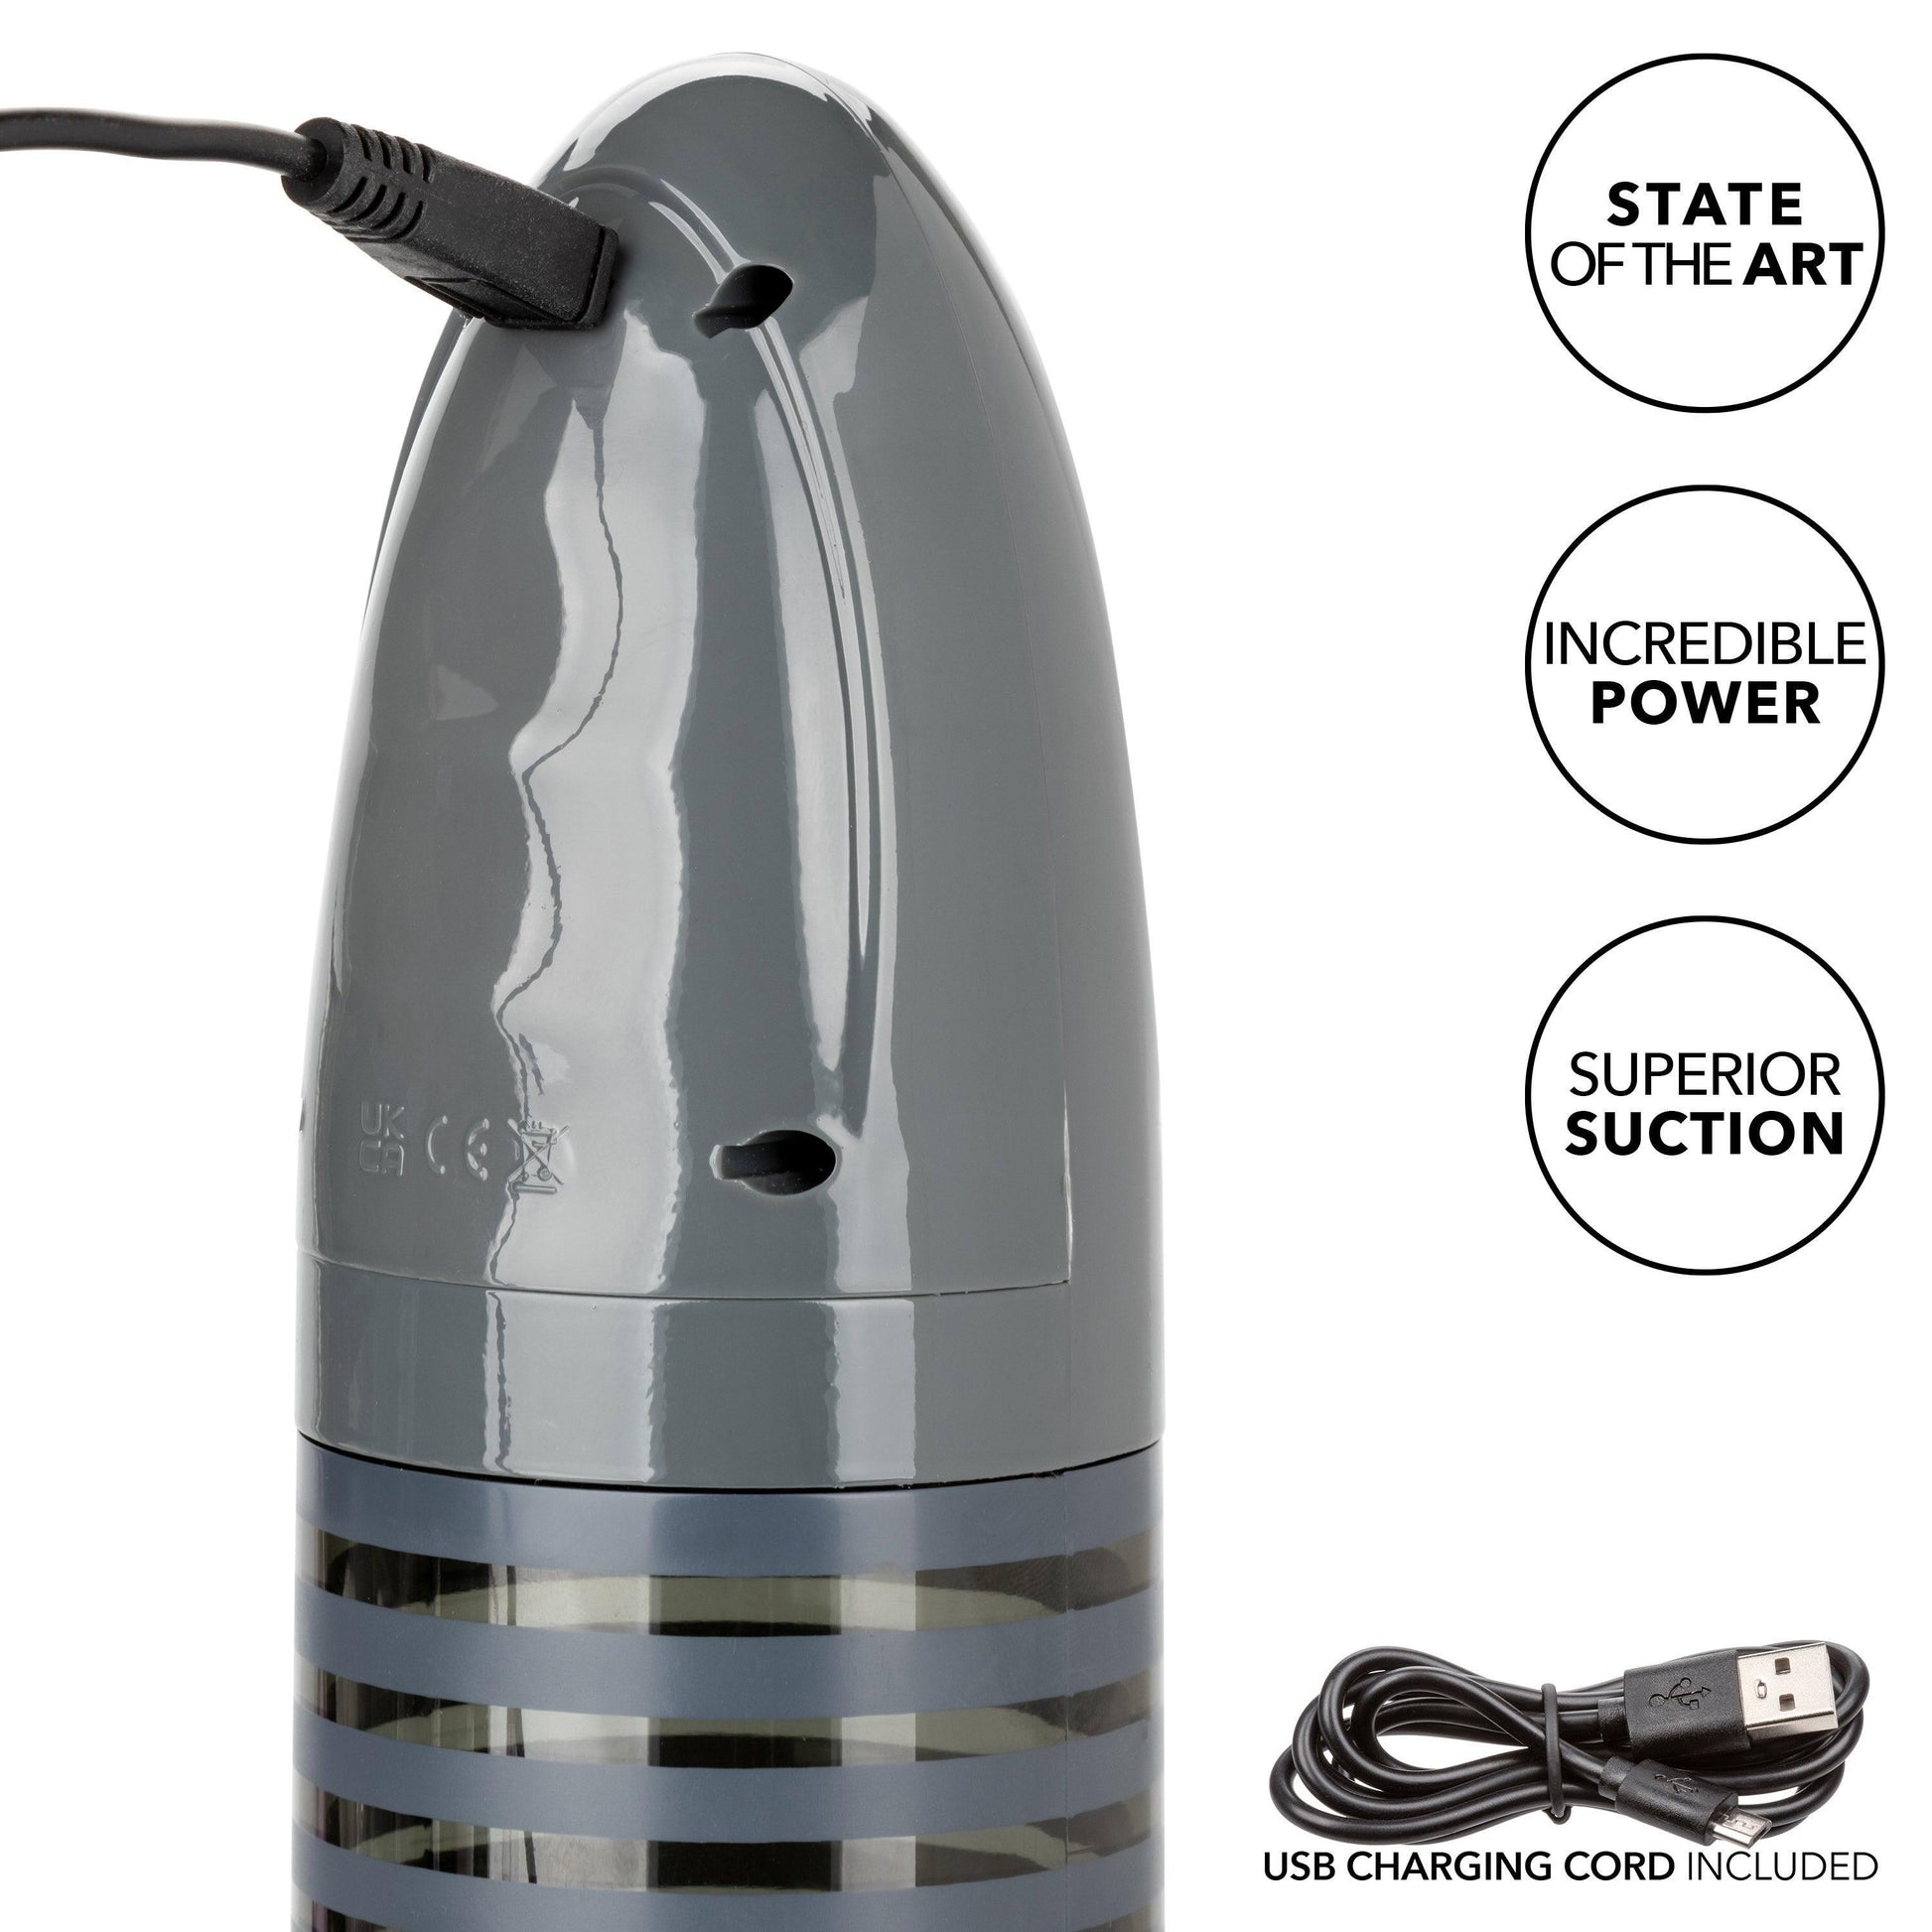 Link Up Rechargeable Smart Pump - My Sex Toy Hub